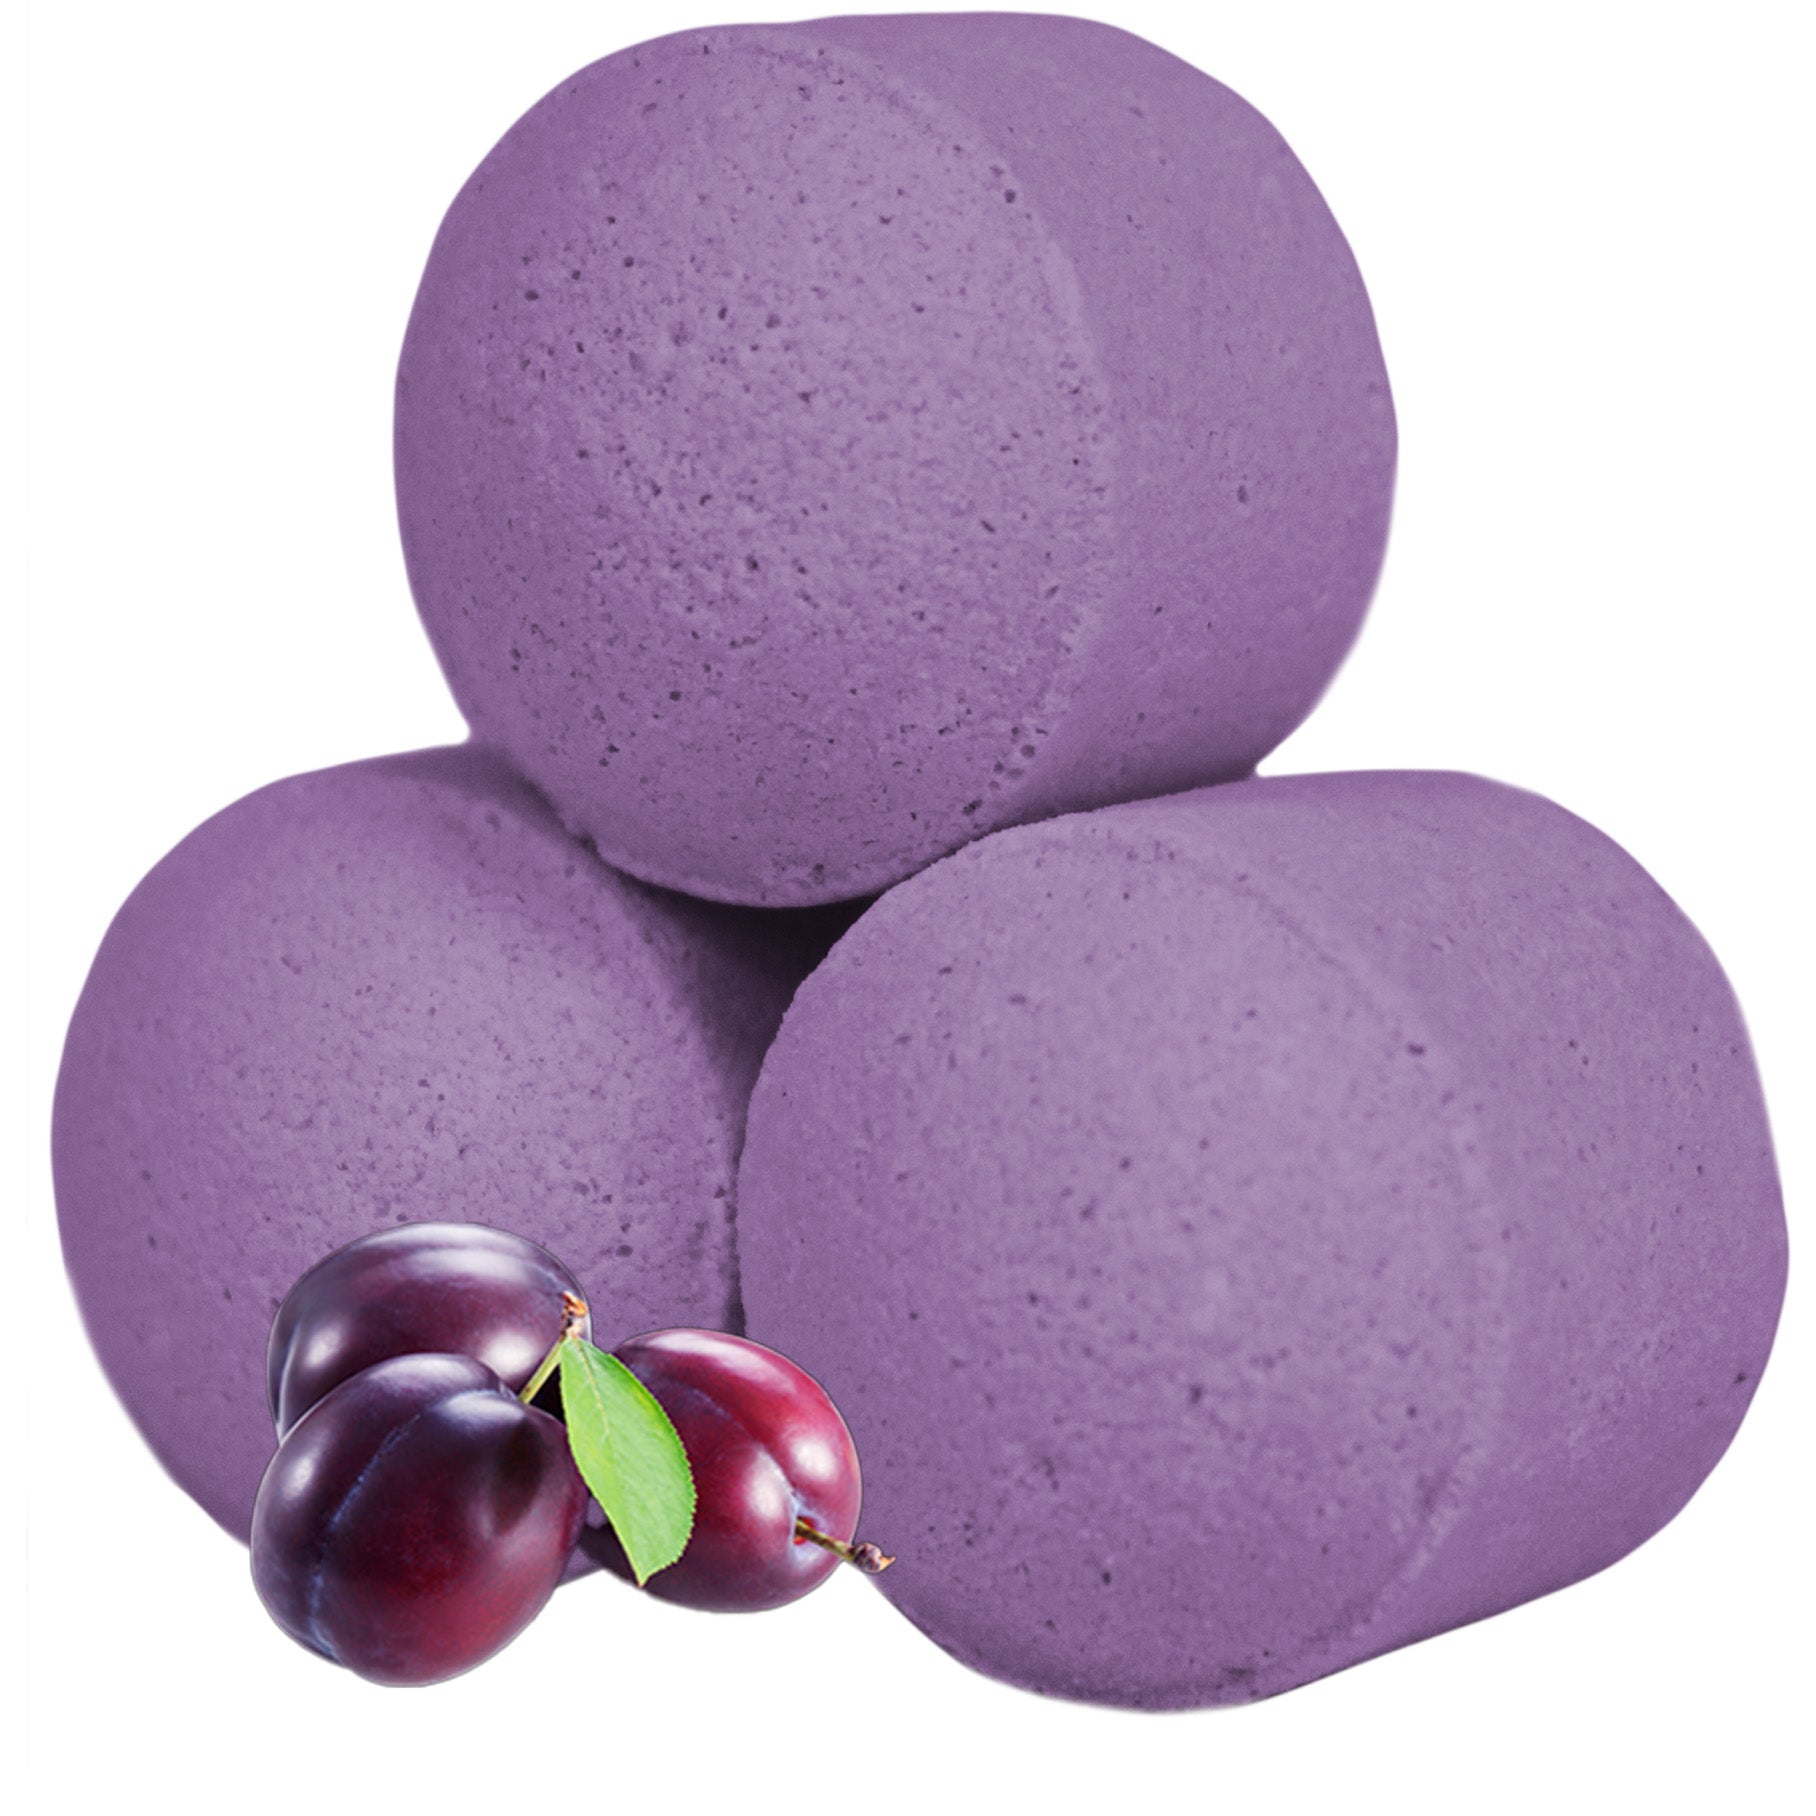 View 13Kg Box of Chill Pills Frosted Sugar Plum information